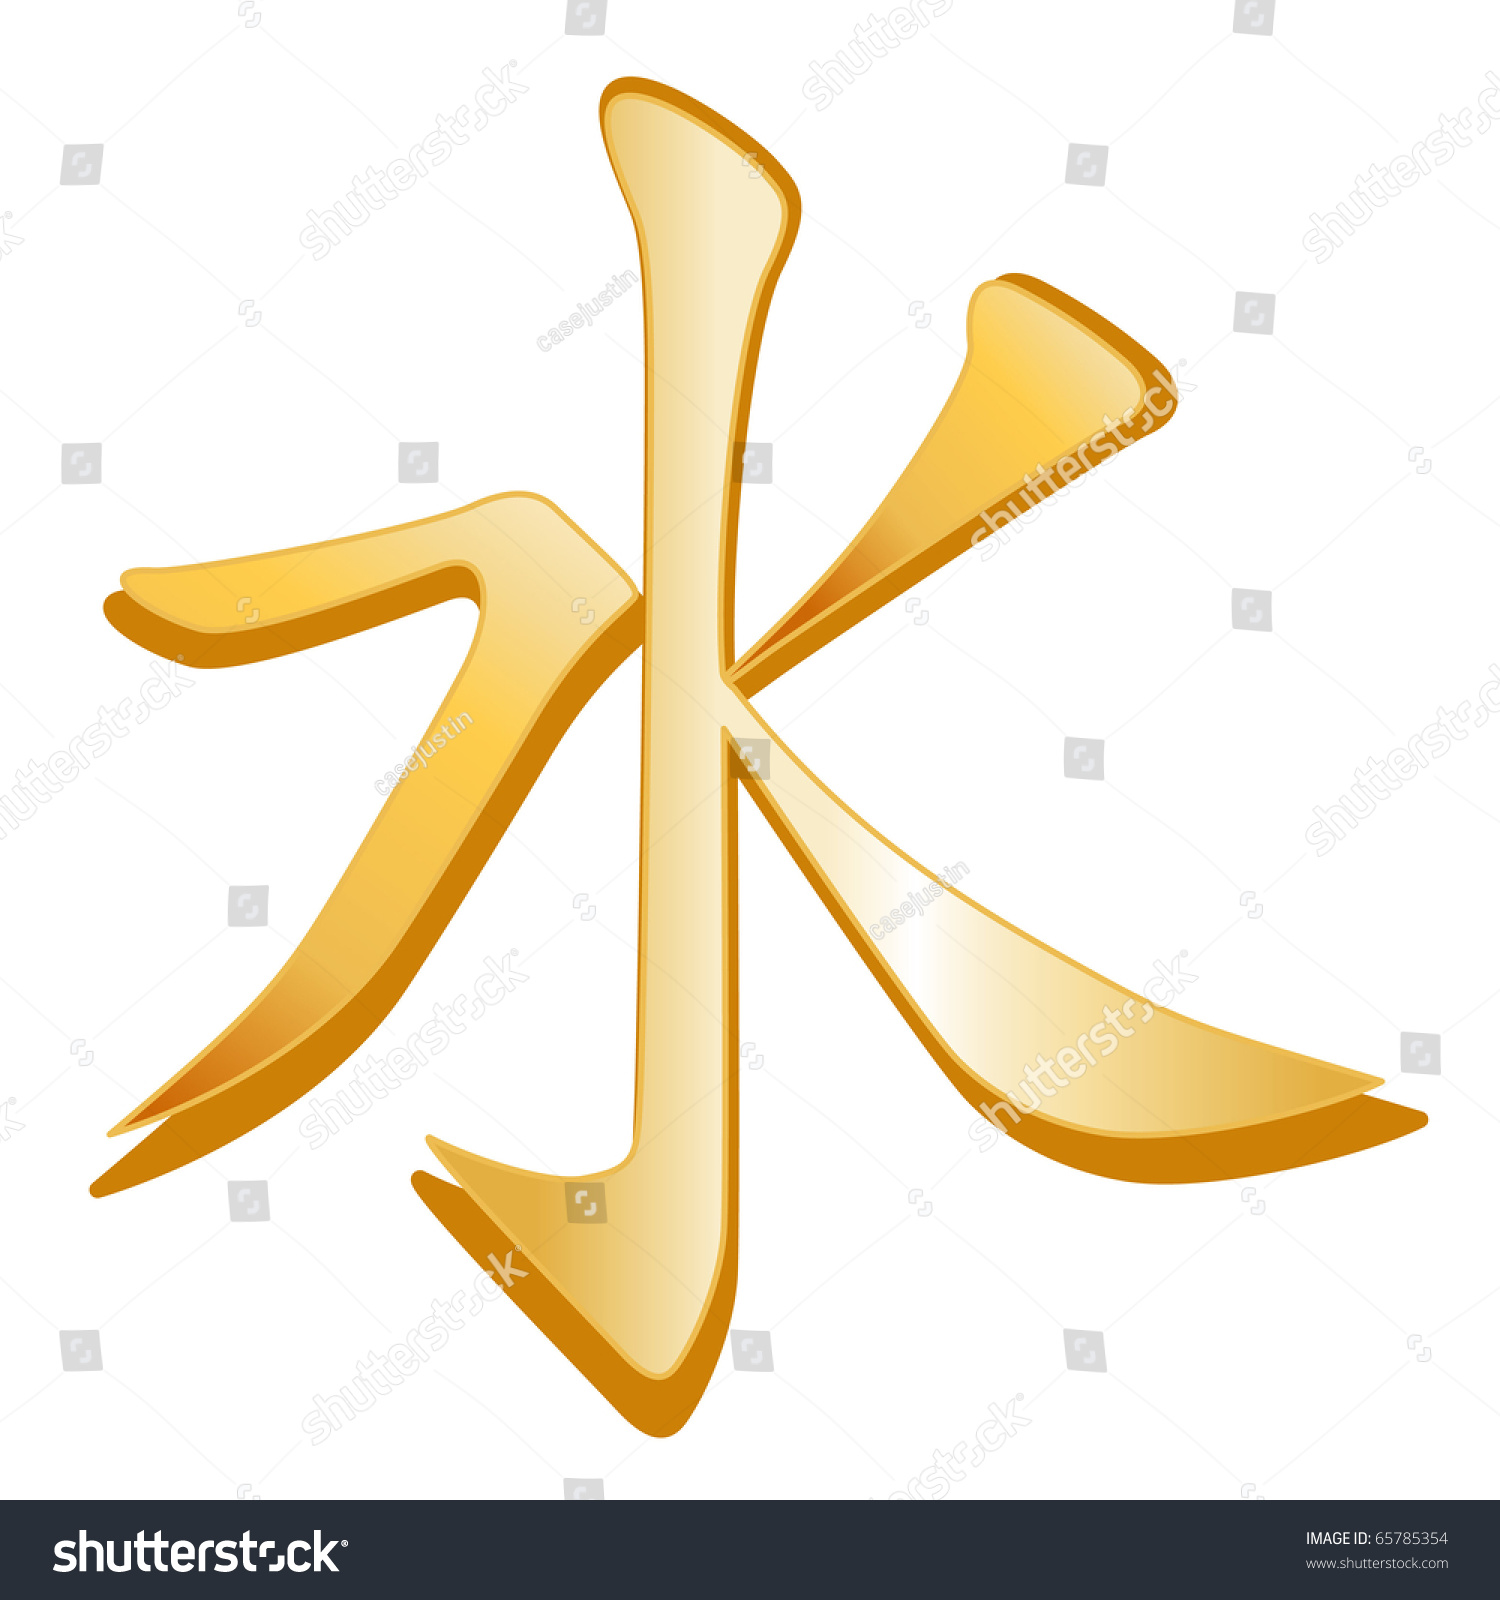 Confucianism Pictures And Symbols : Confucianism Stock ...